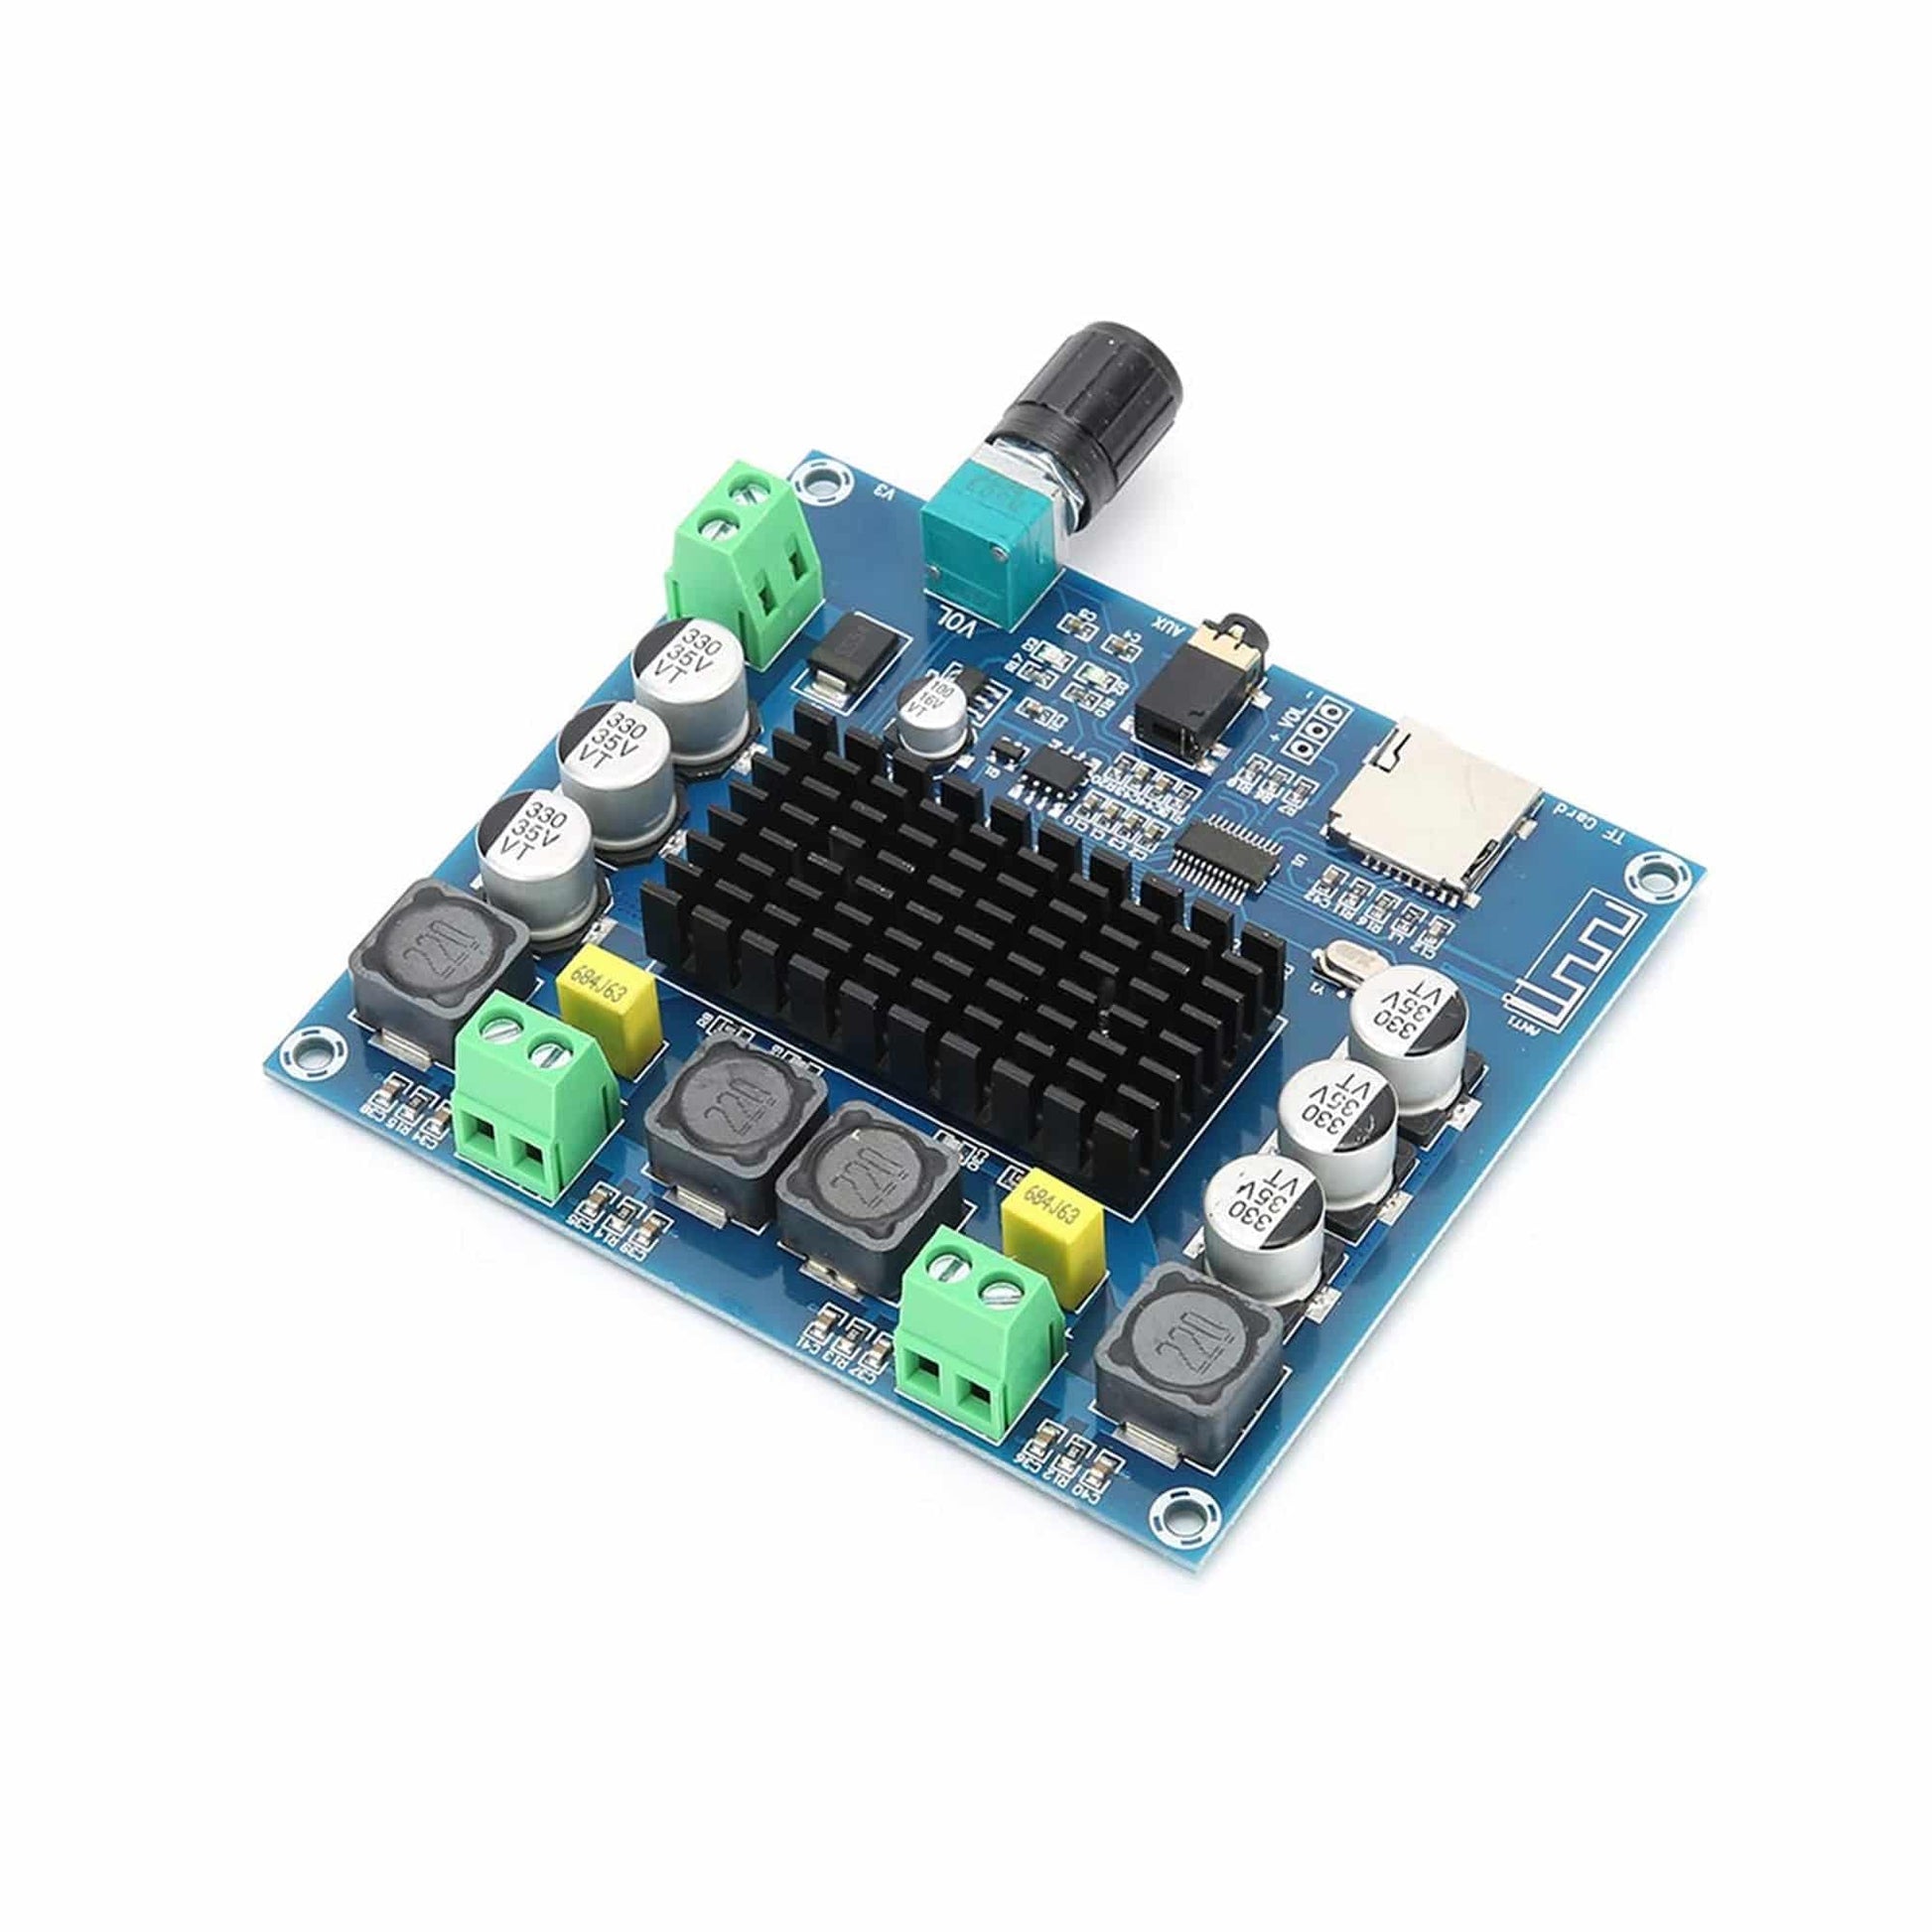 XH-A105 Bluetooth 5.0 TDA7498 2x100W Stereo Audio AMP Digital Amplifier Board Module Support TF Card AUX- RS2552 - REES52